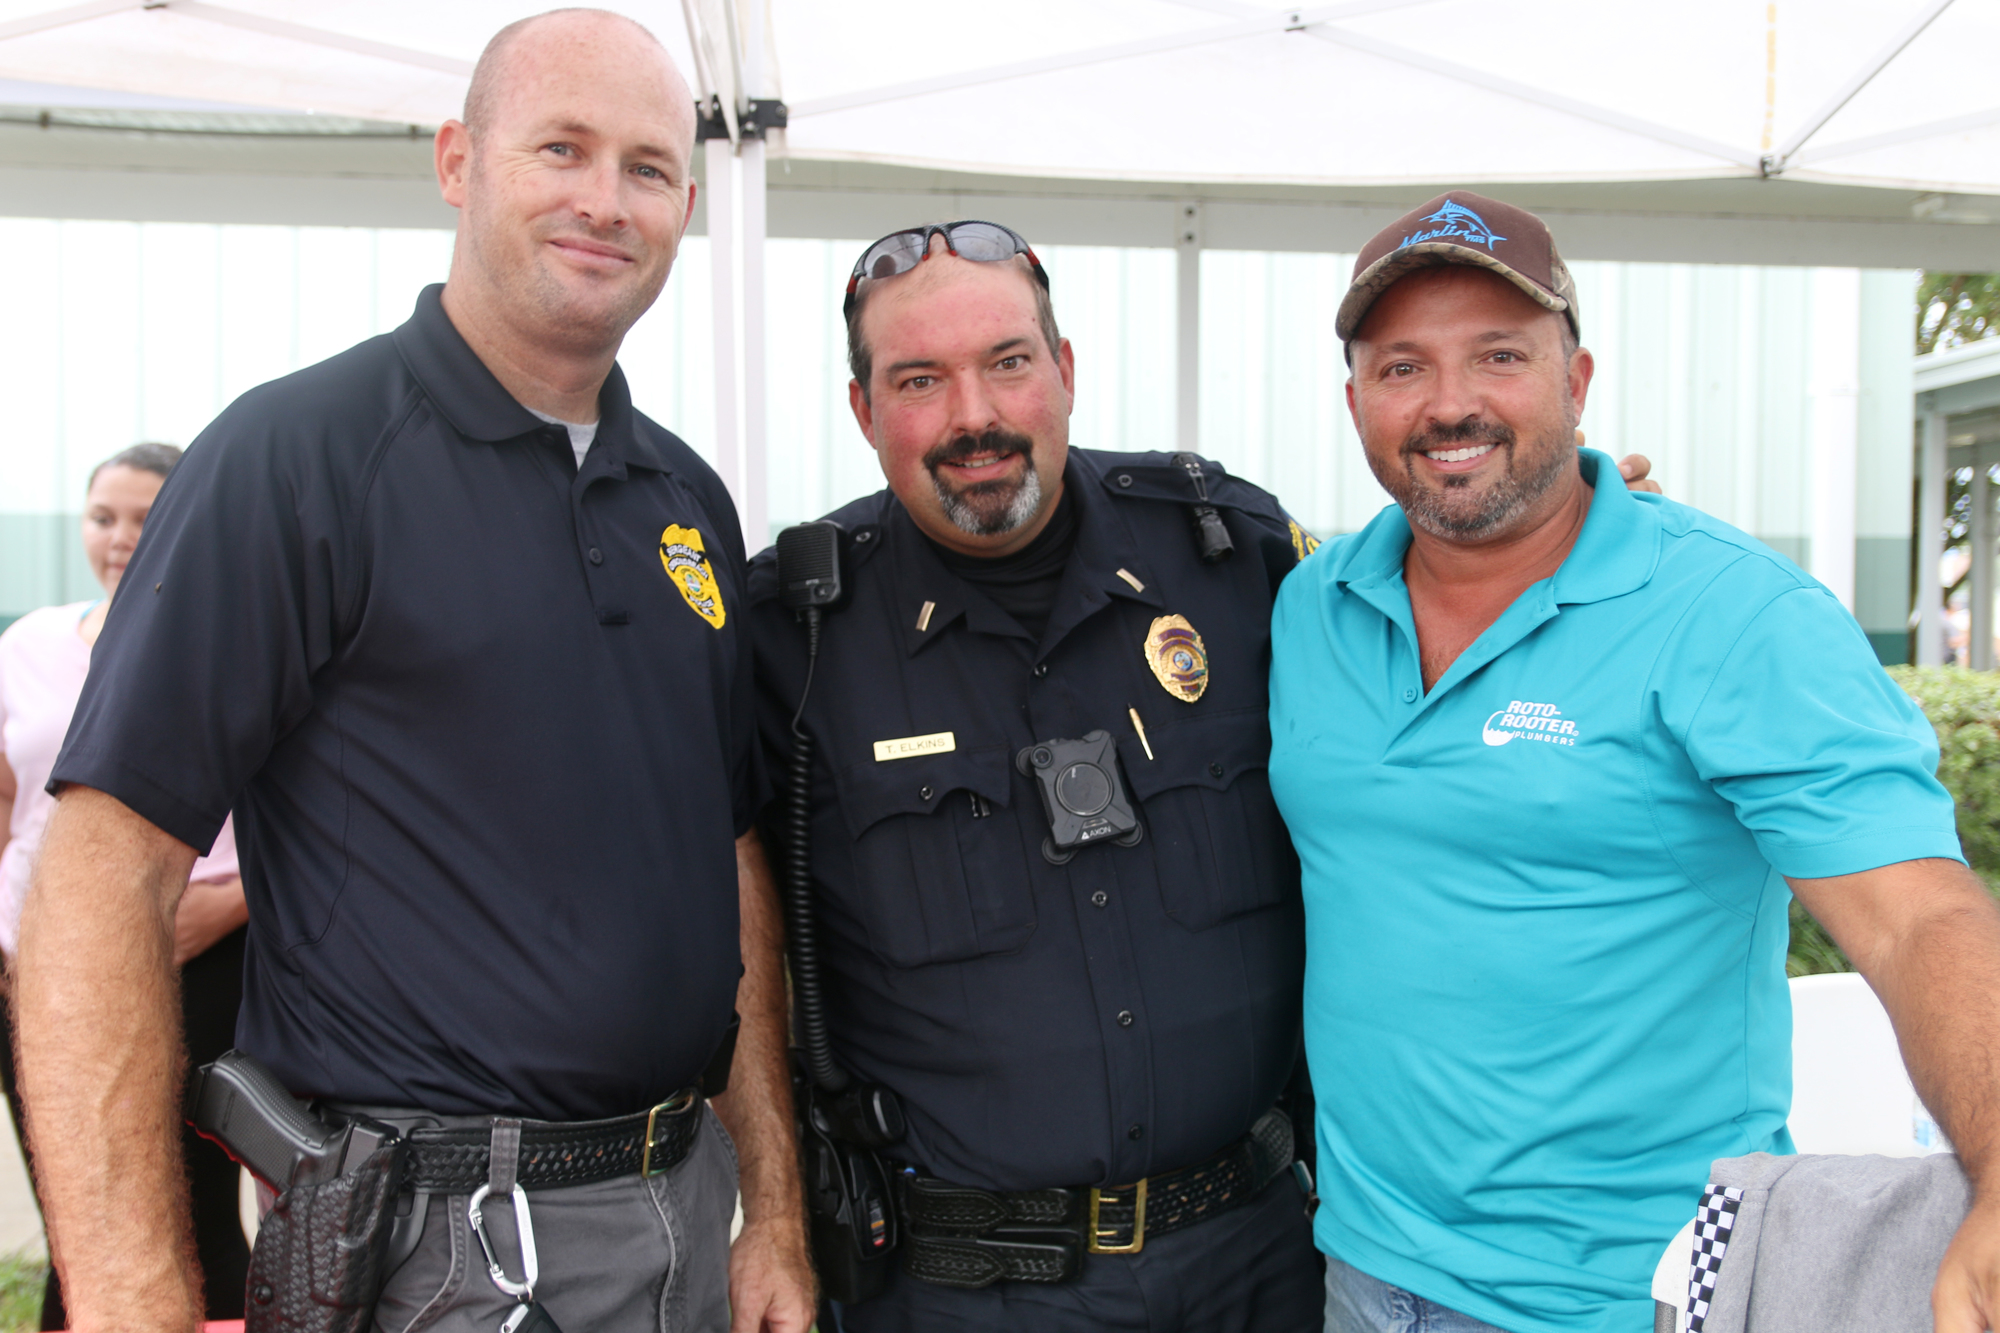 Sgt. Mike Pavelka, Lt. Thomas Elkins and Mike Elkins during the annual National Night Out event on Tuesday, Aug. 6. Photo by Jarleene Almenas